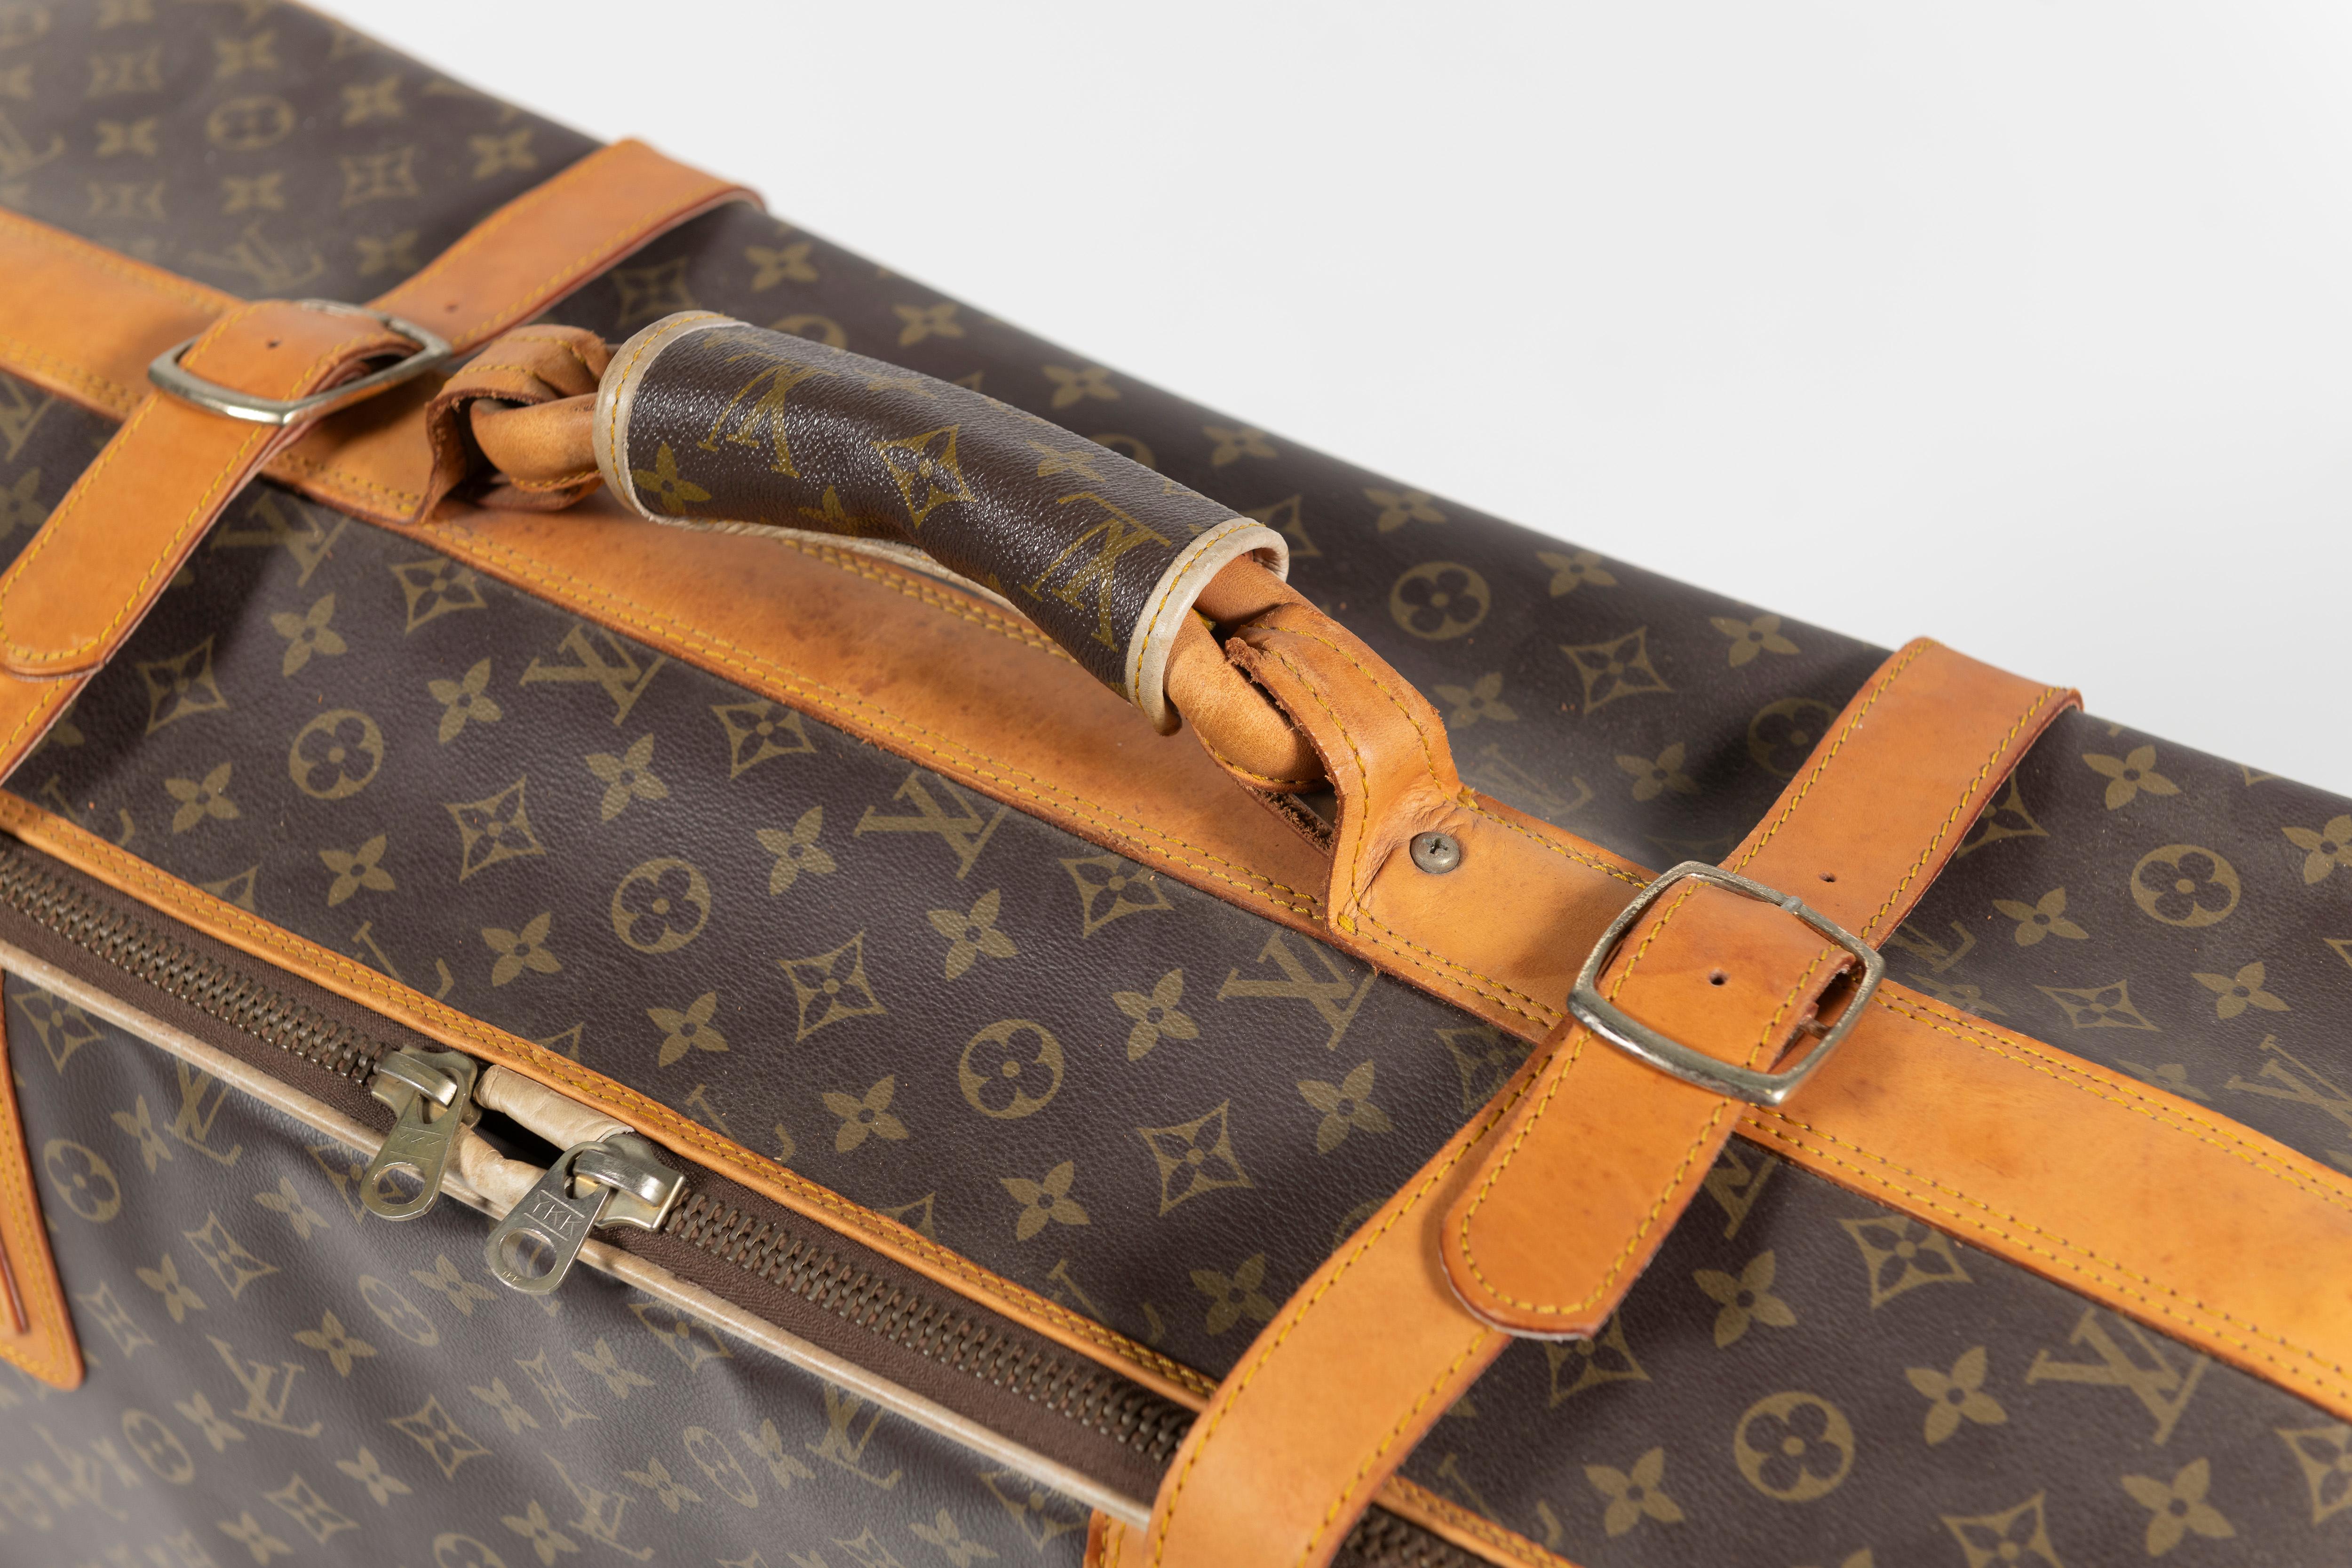 Vintage Louis Vuitton Suitcase, Monogrammed Coated Canvas, Large-Sized In Good Condition For Sale In San Francisco, CA